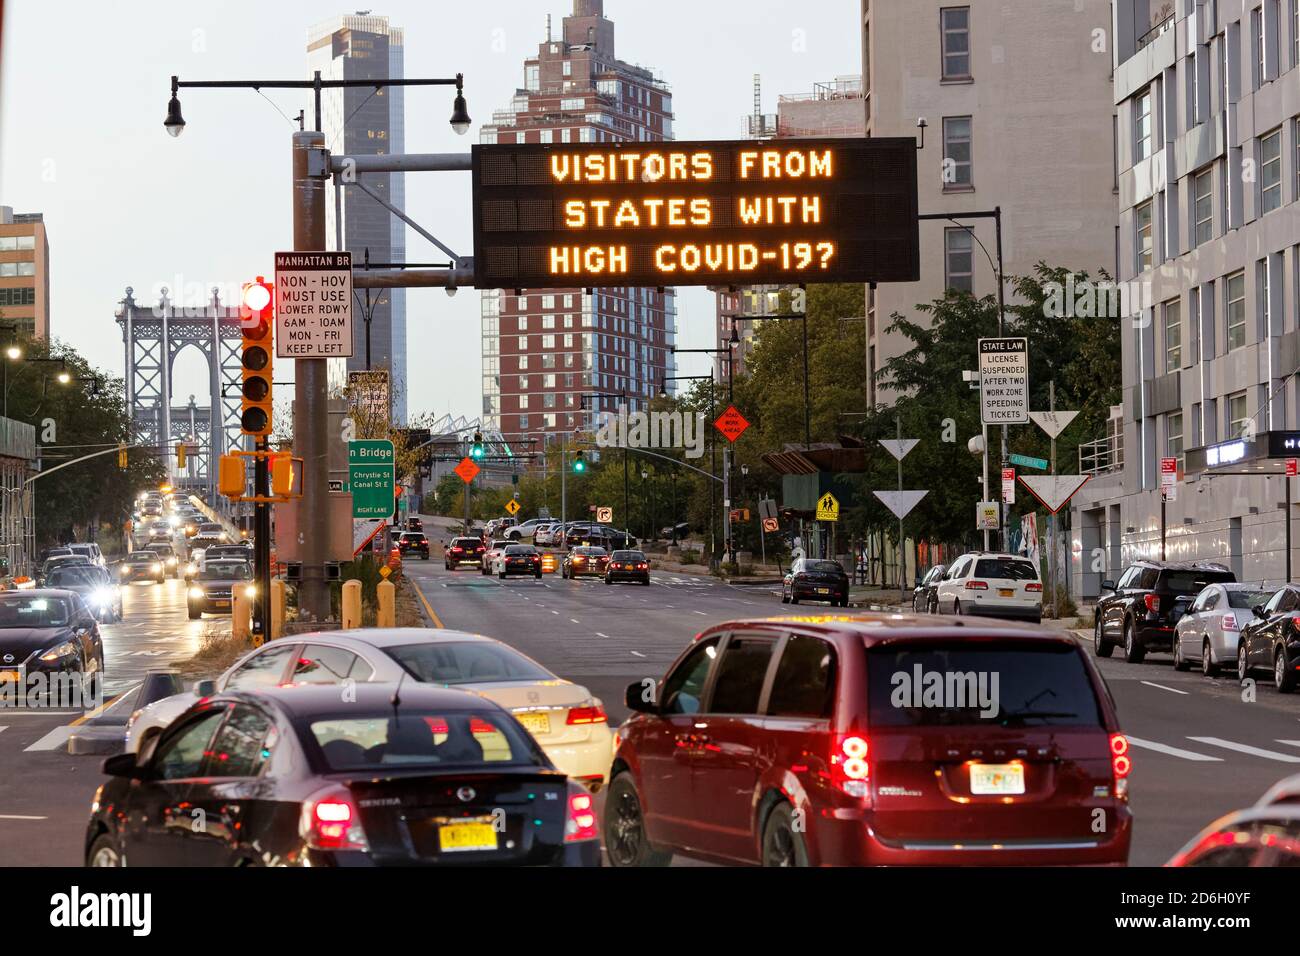 NYC traffic signs used for covid advice and restrictions Stock Photo